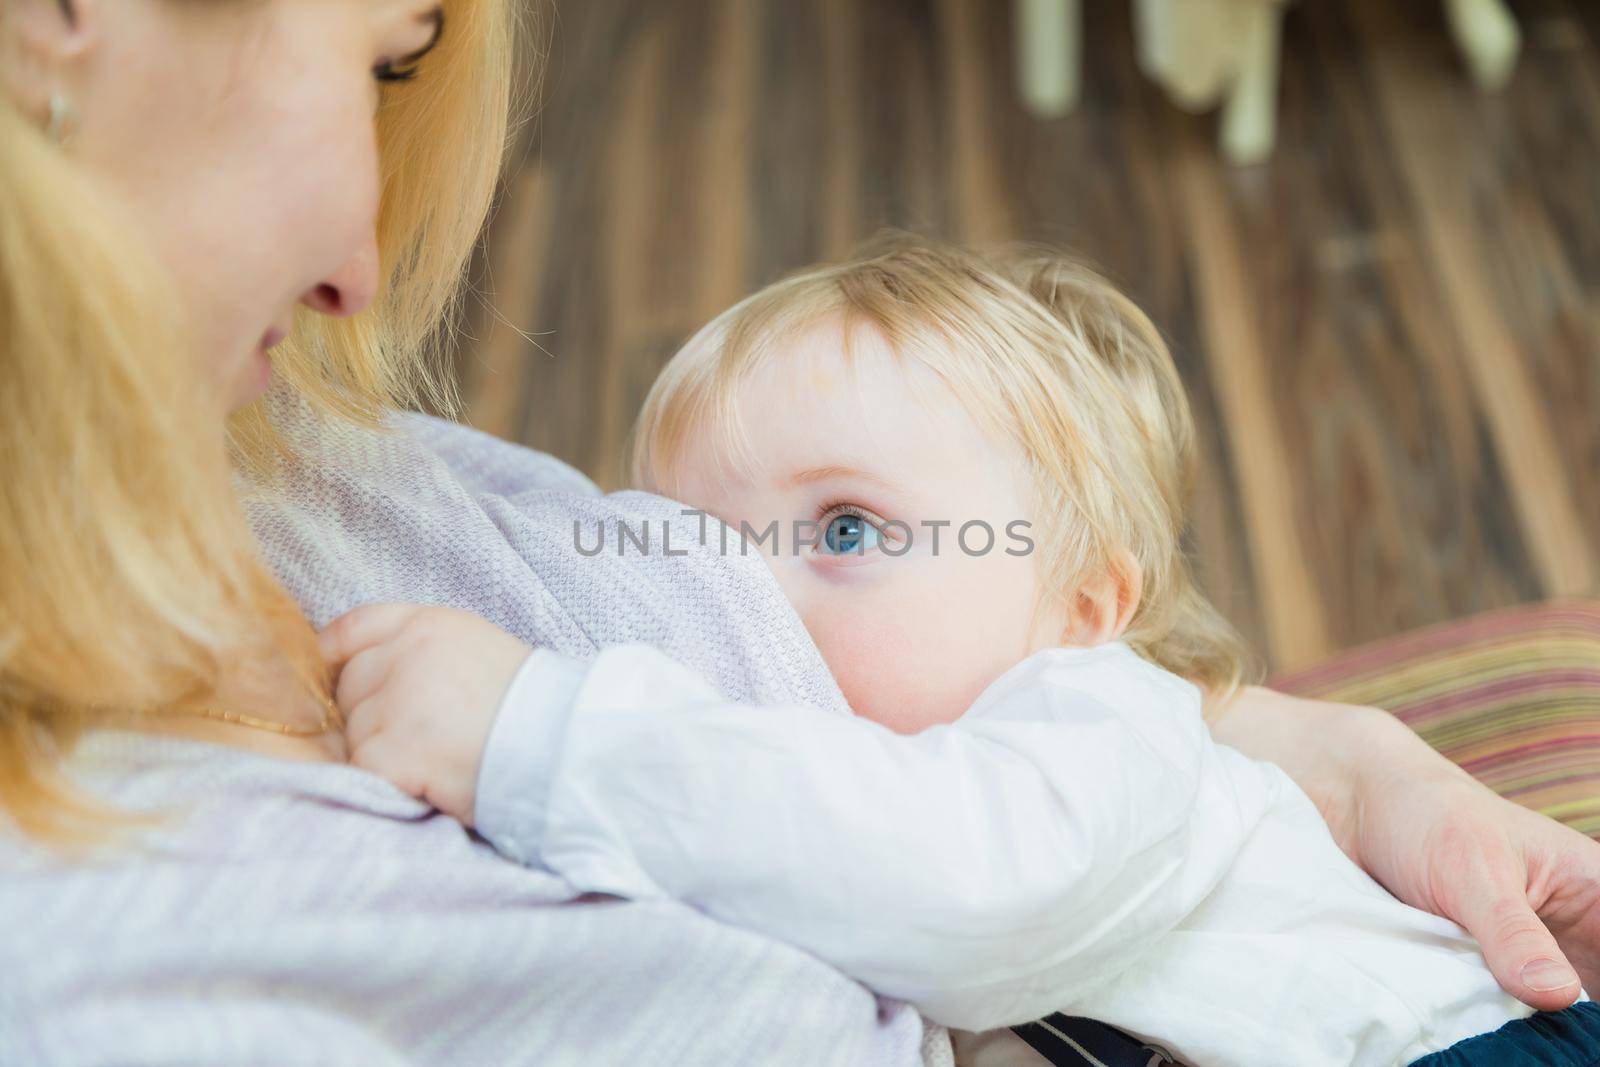 Mom is breastfeeding the baby. She looks at the baby with love and tenderness. Close-up